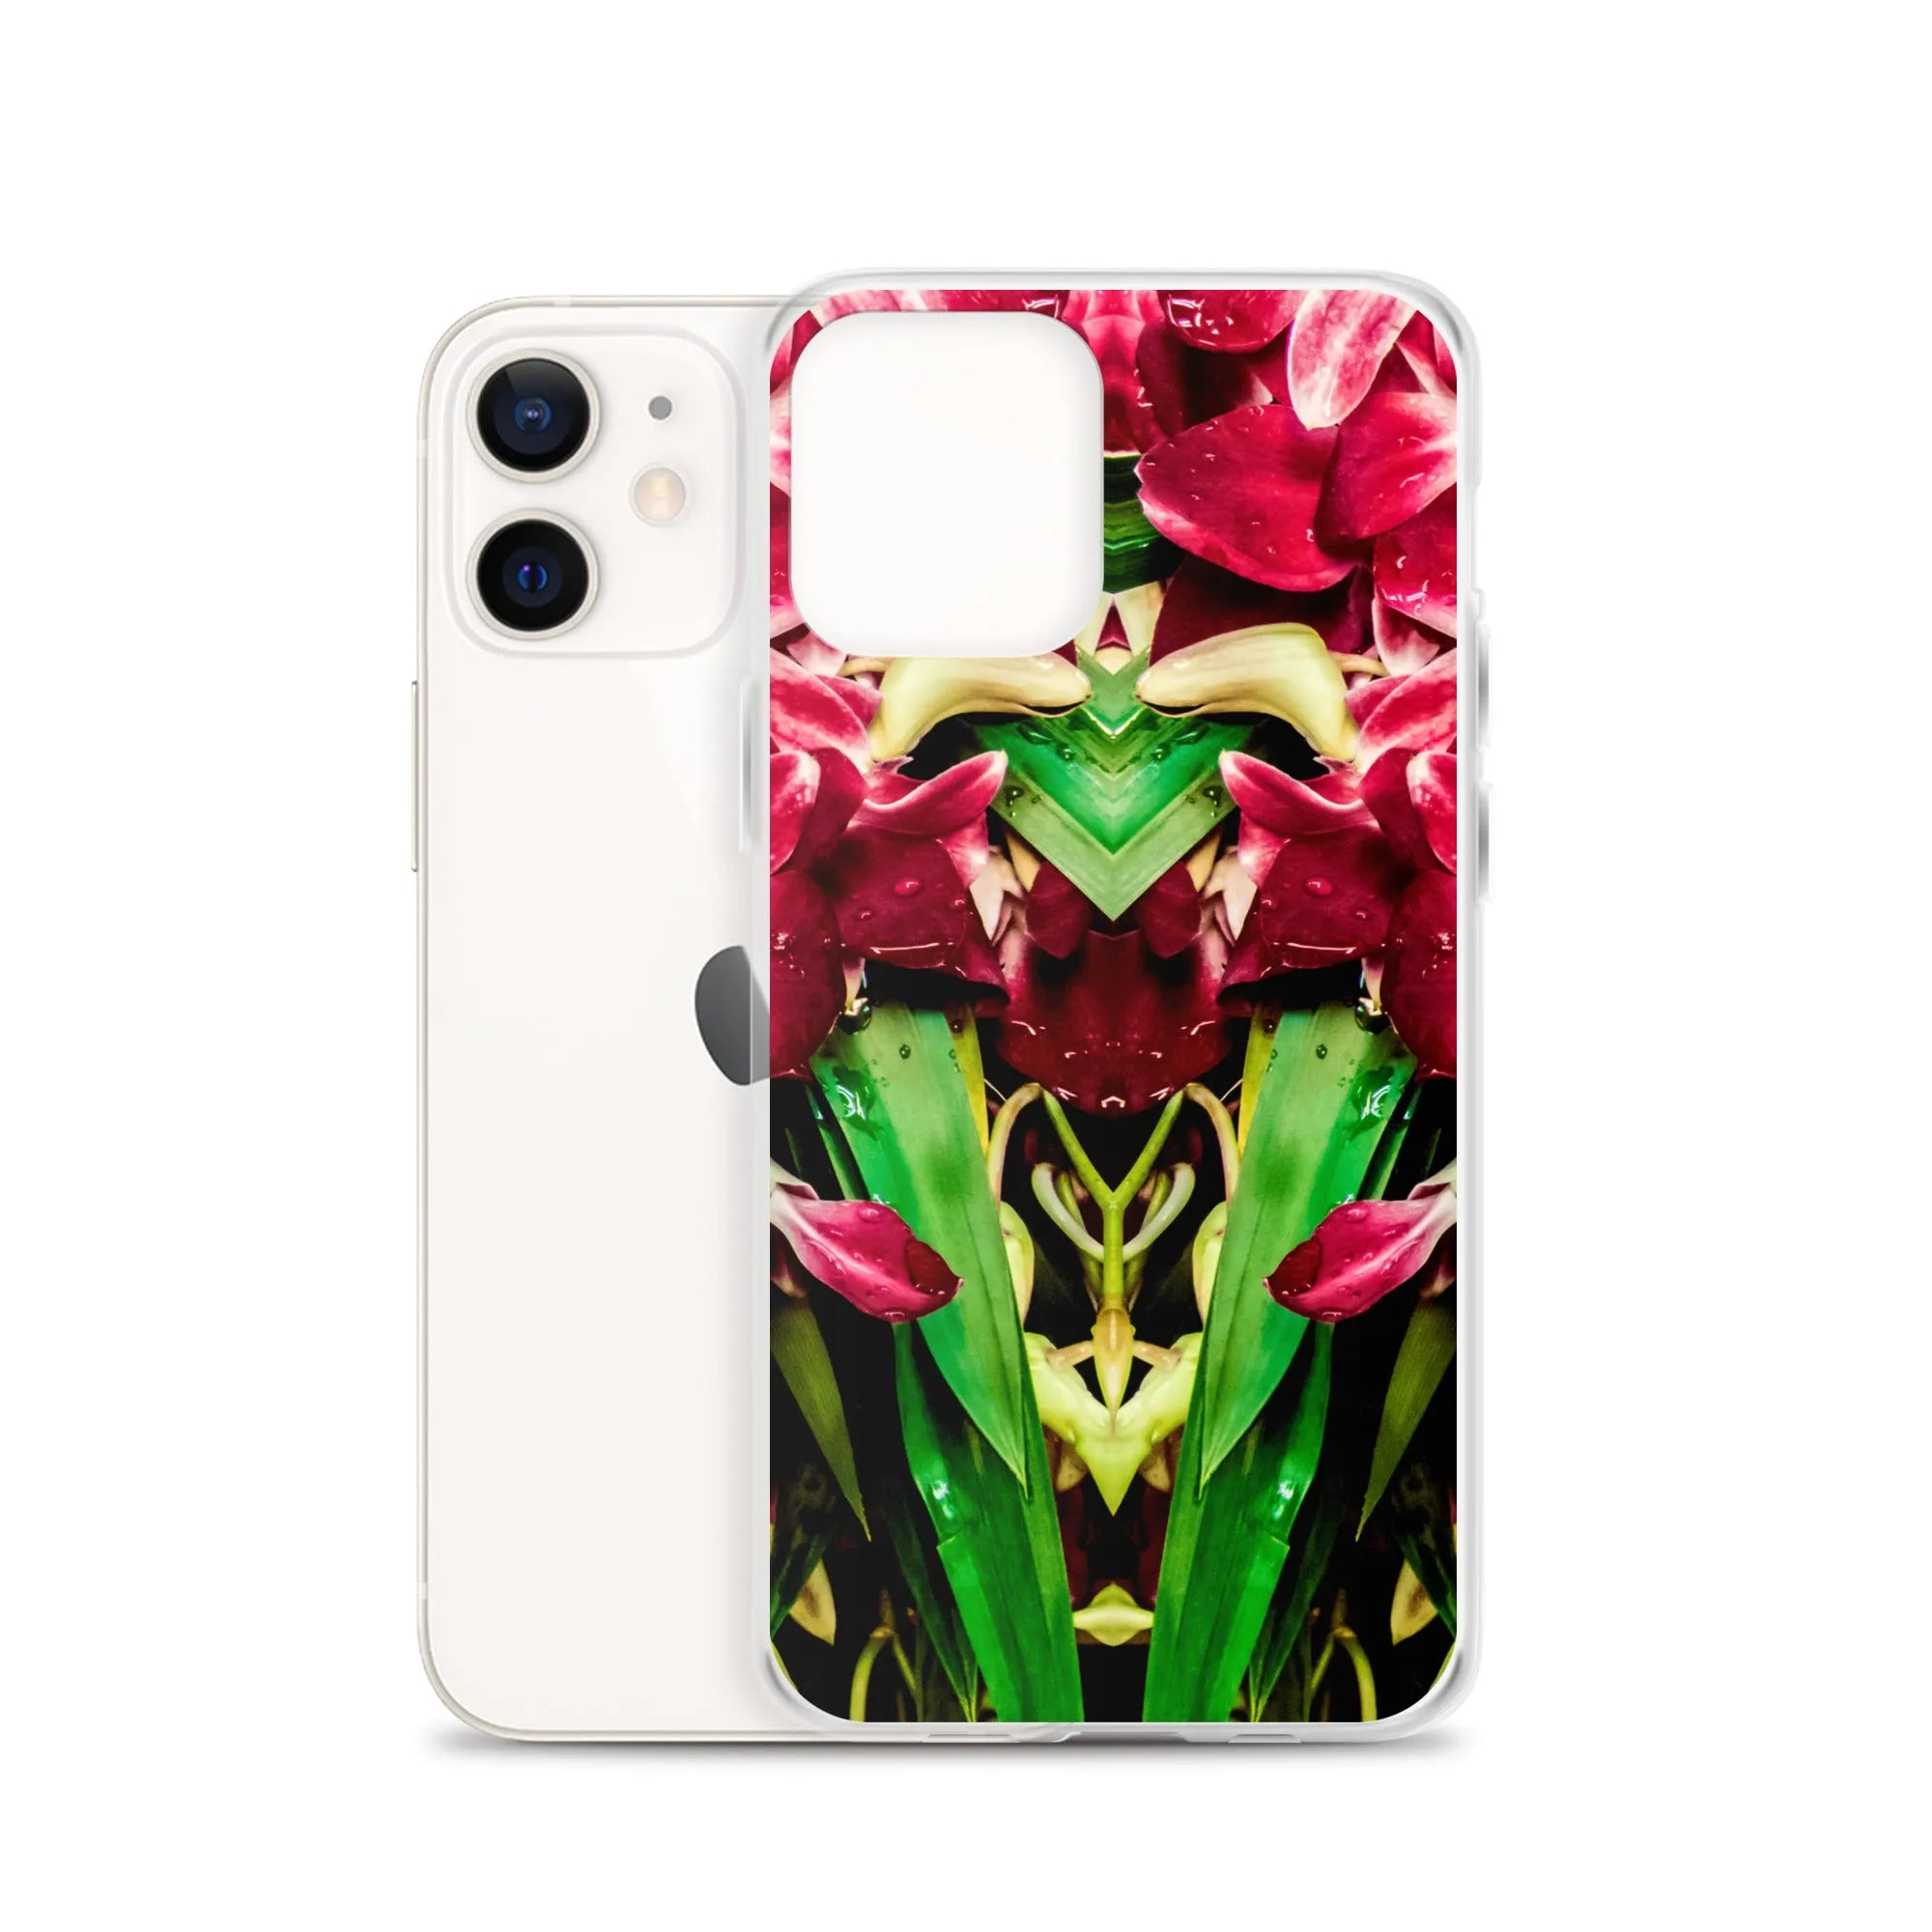 Ruby Reds² Floral Iphone Case - Iphone 12 - Mobile Phone Cases - Aesthetic Art